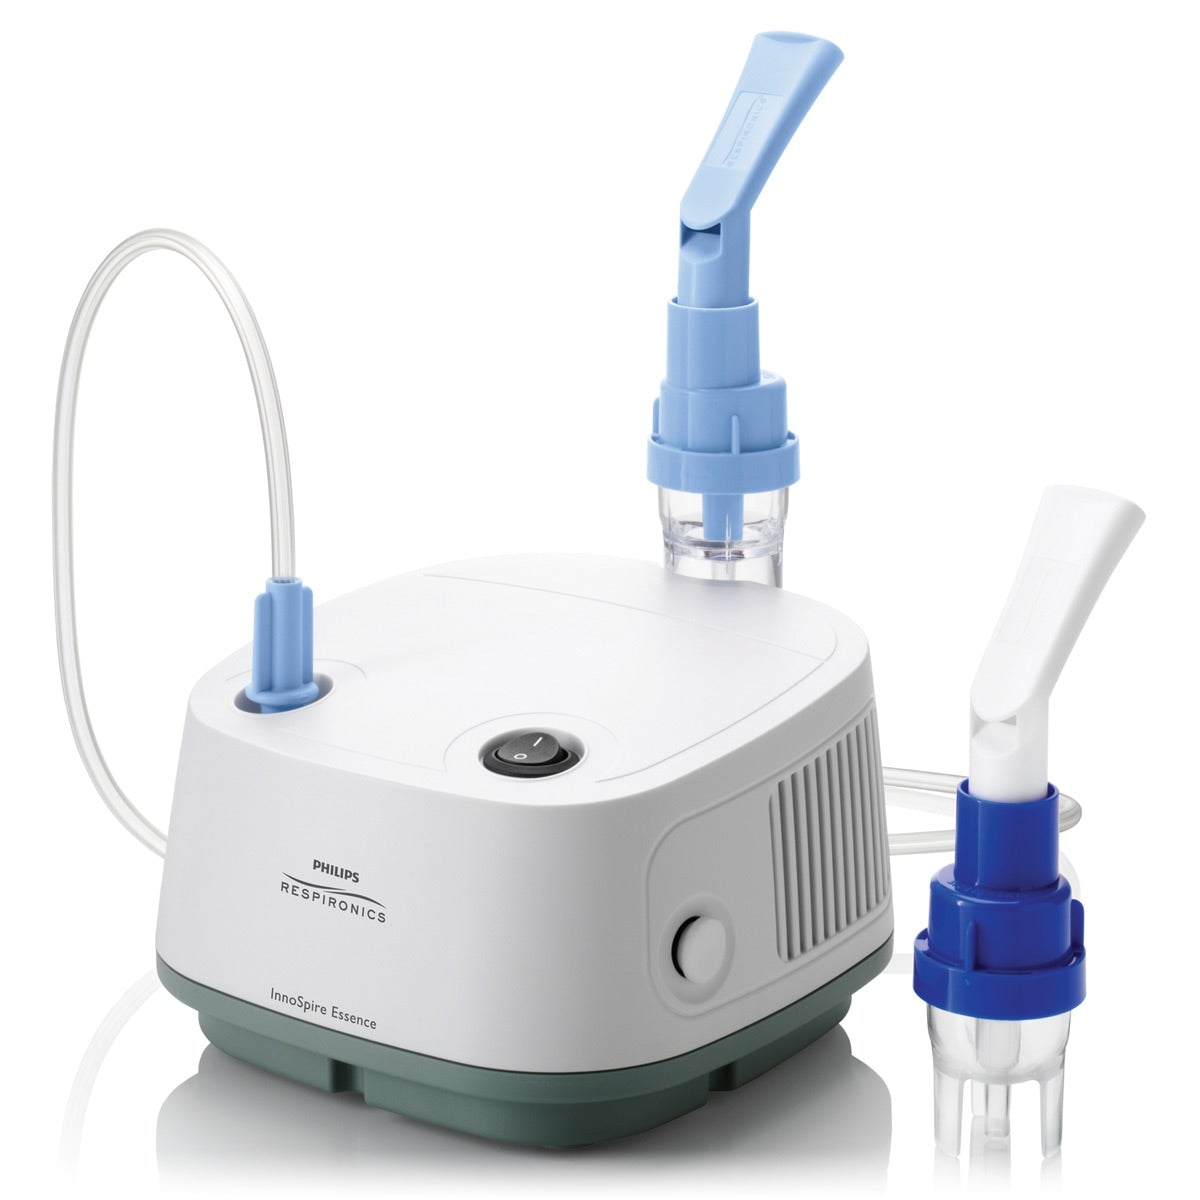 Philips Respironics  InnoSpire Essence Compressor Nebulizer with Reusable & Disposable SideStream Nebulizers